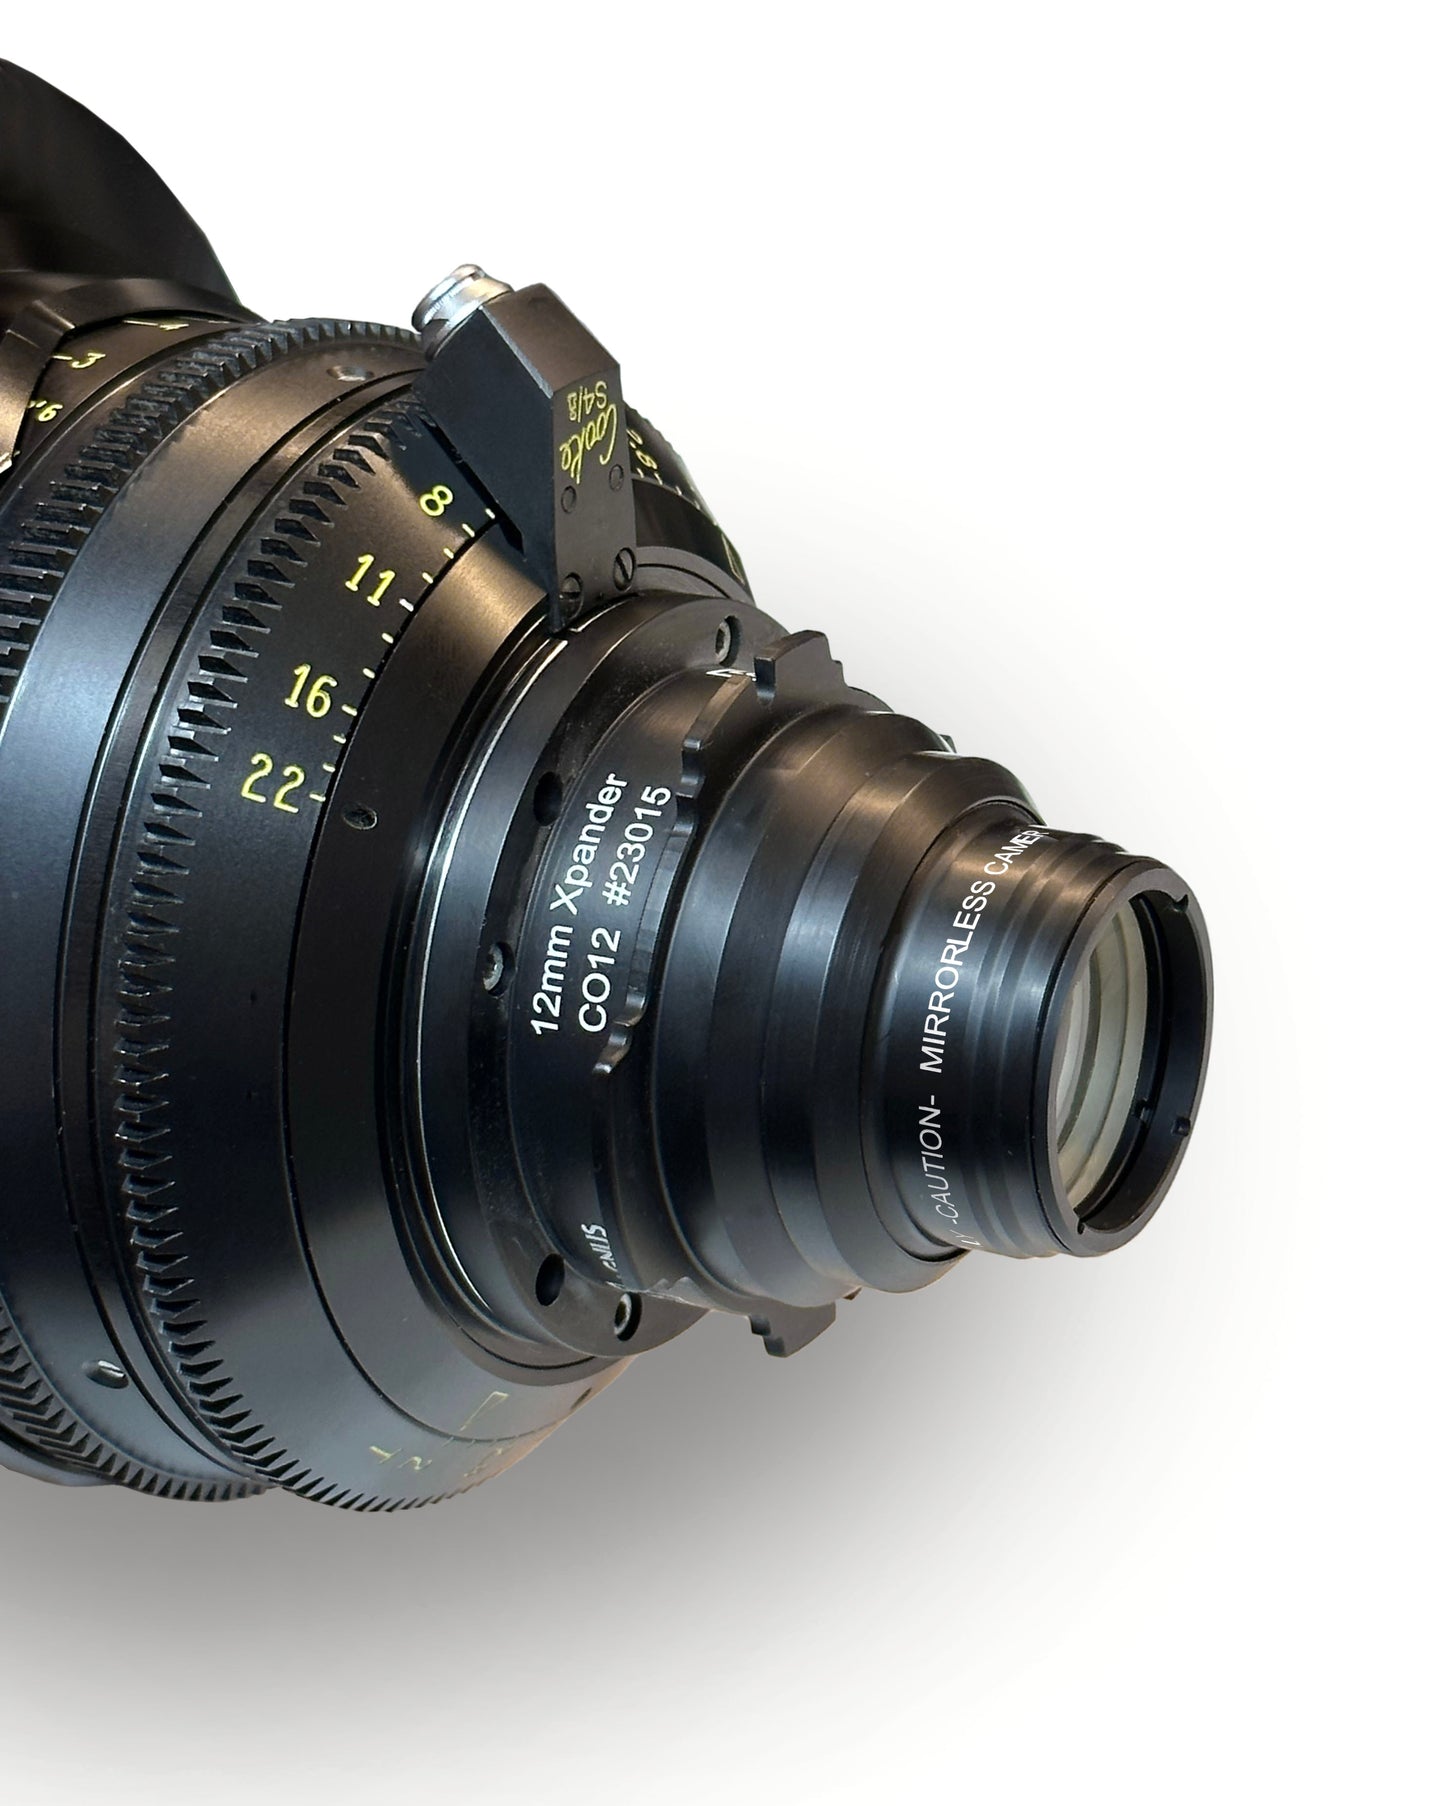 COOKE S4 12mm ACADEMY TO S35 OPEN GATE XPANDER